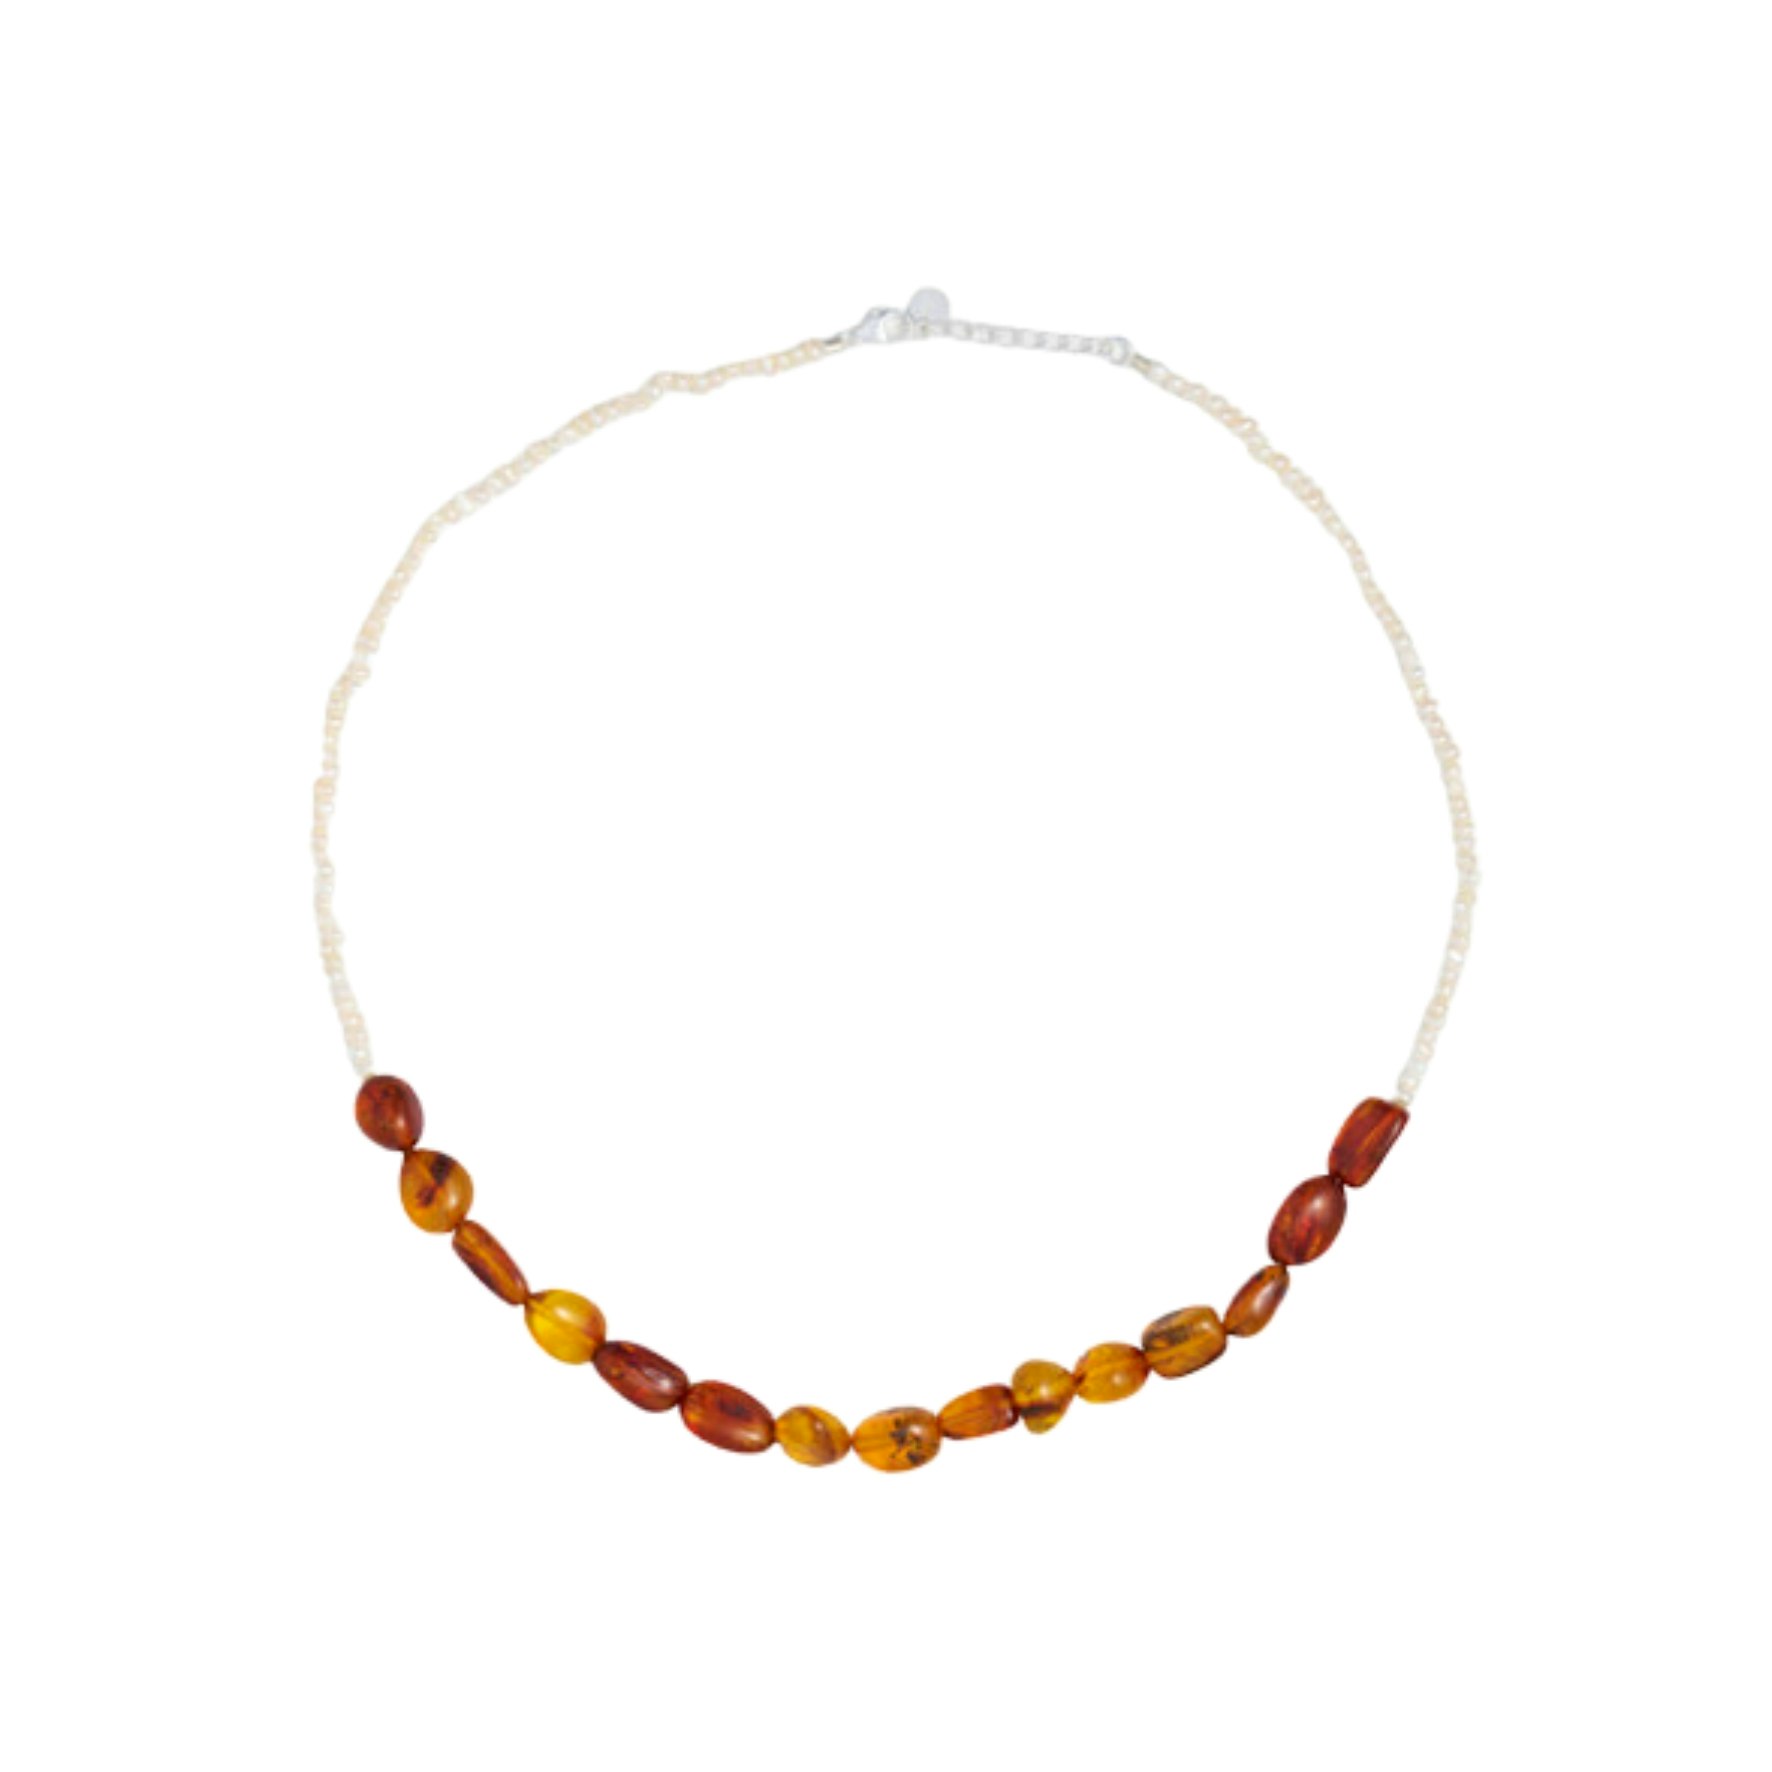 Curious Necklace from Sorelle Jewellery in Goldplated Silver Sterling 925